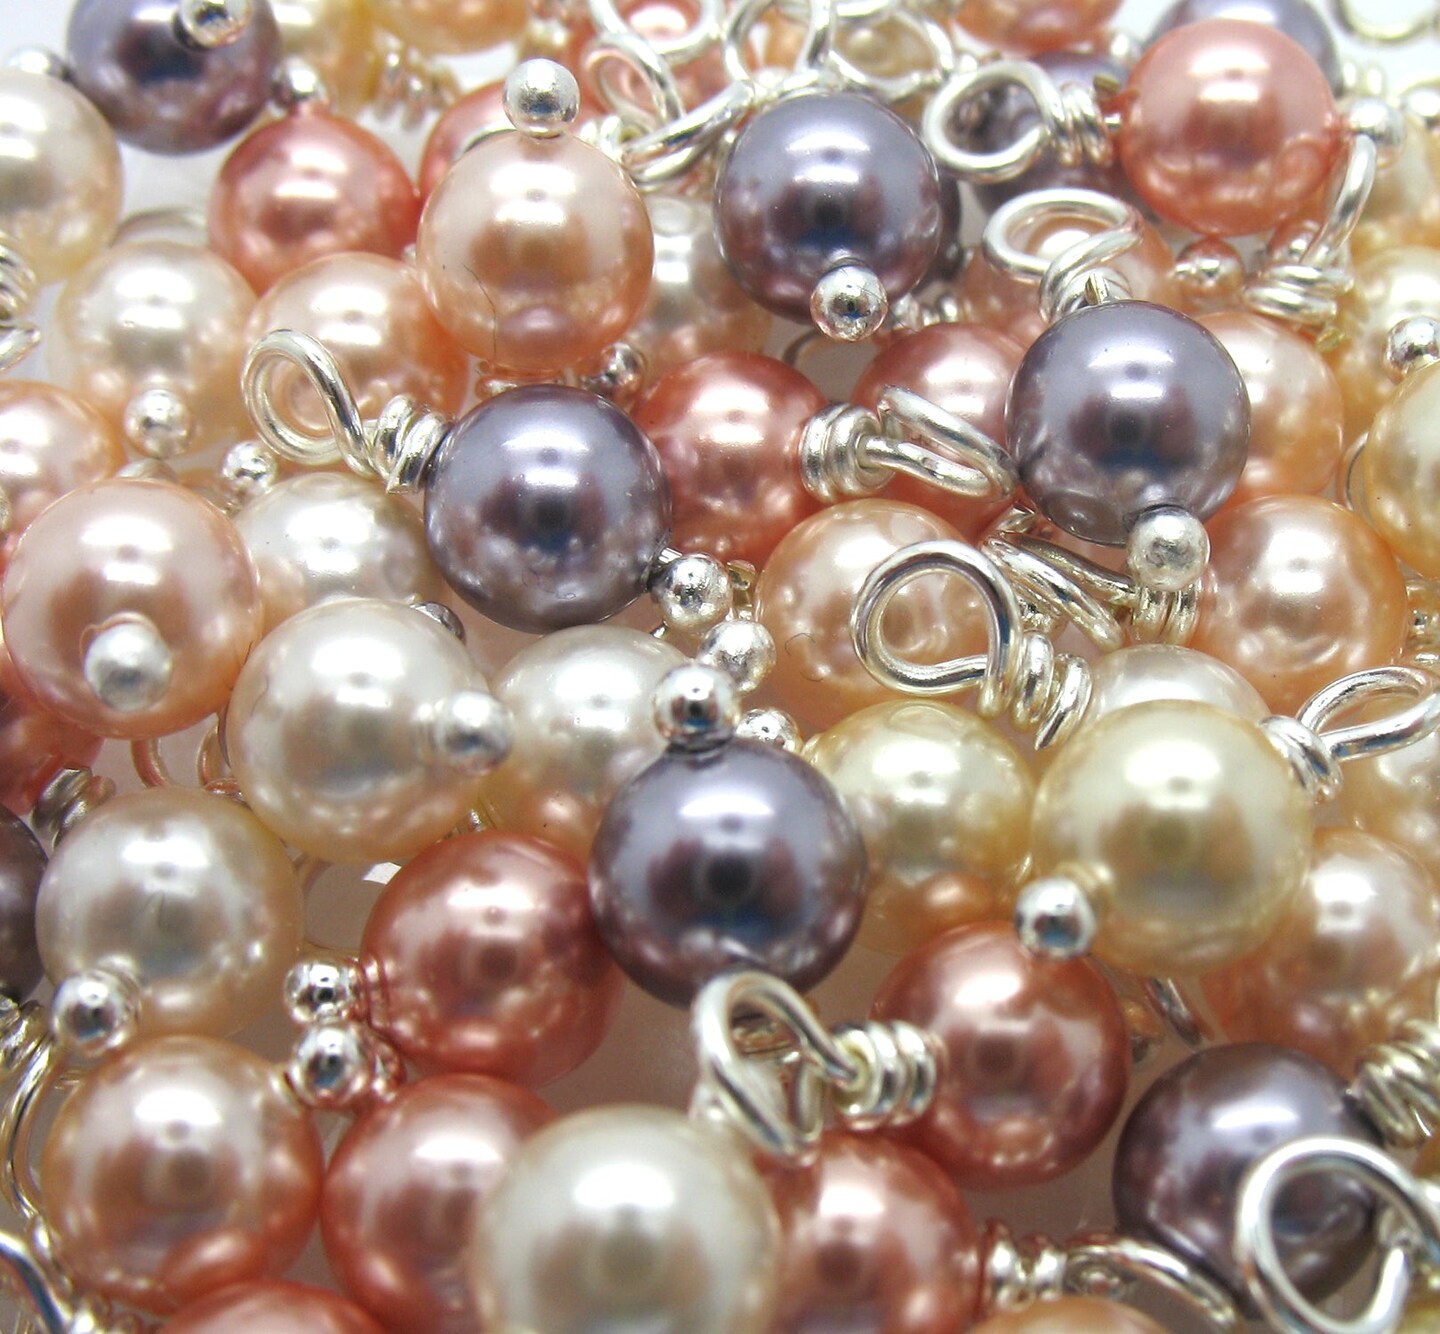 Freshwater Pearl Bead Charms - Pastel Pearl Beads in Mint Peach Cream